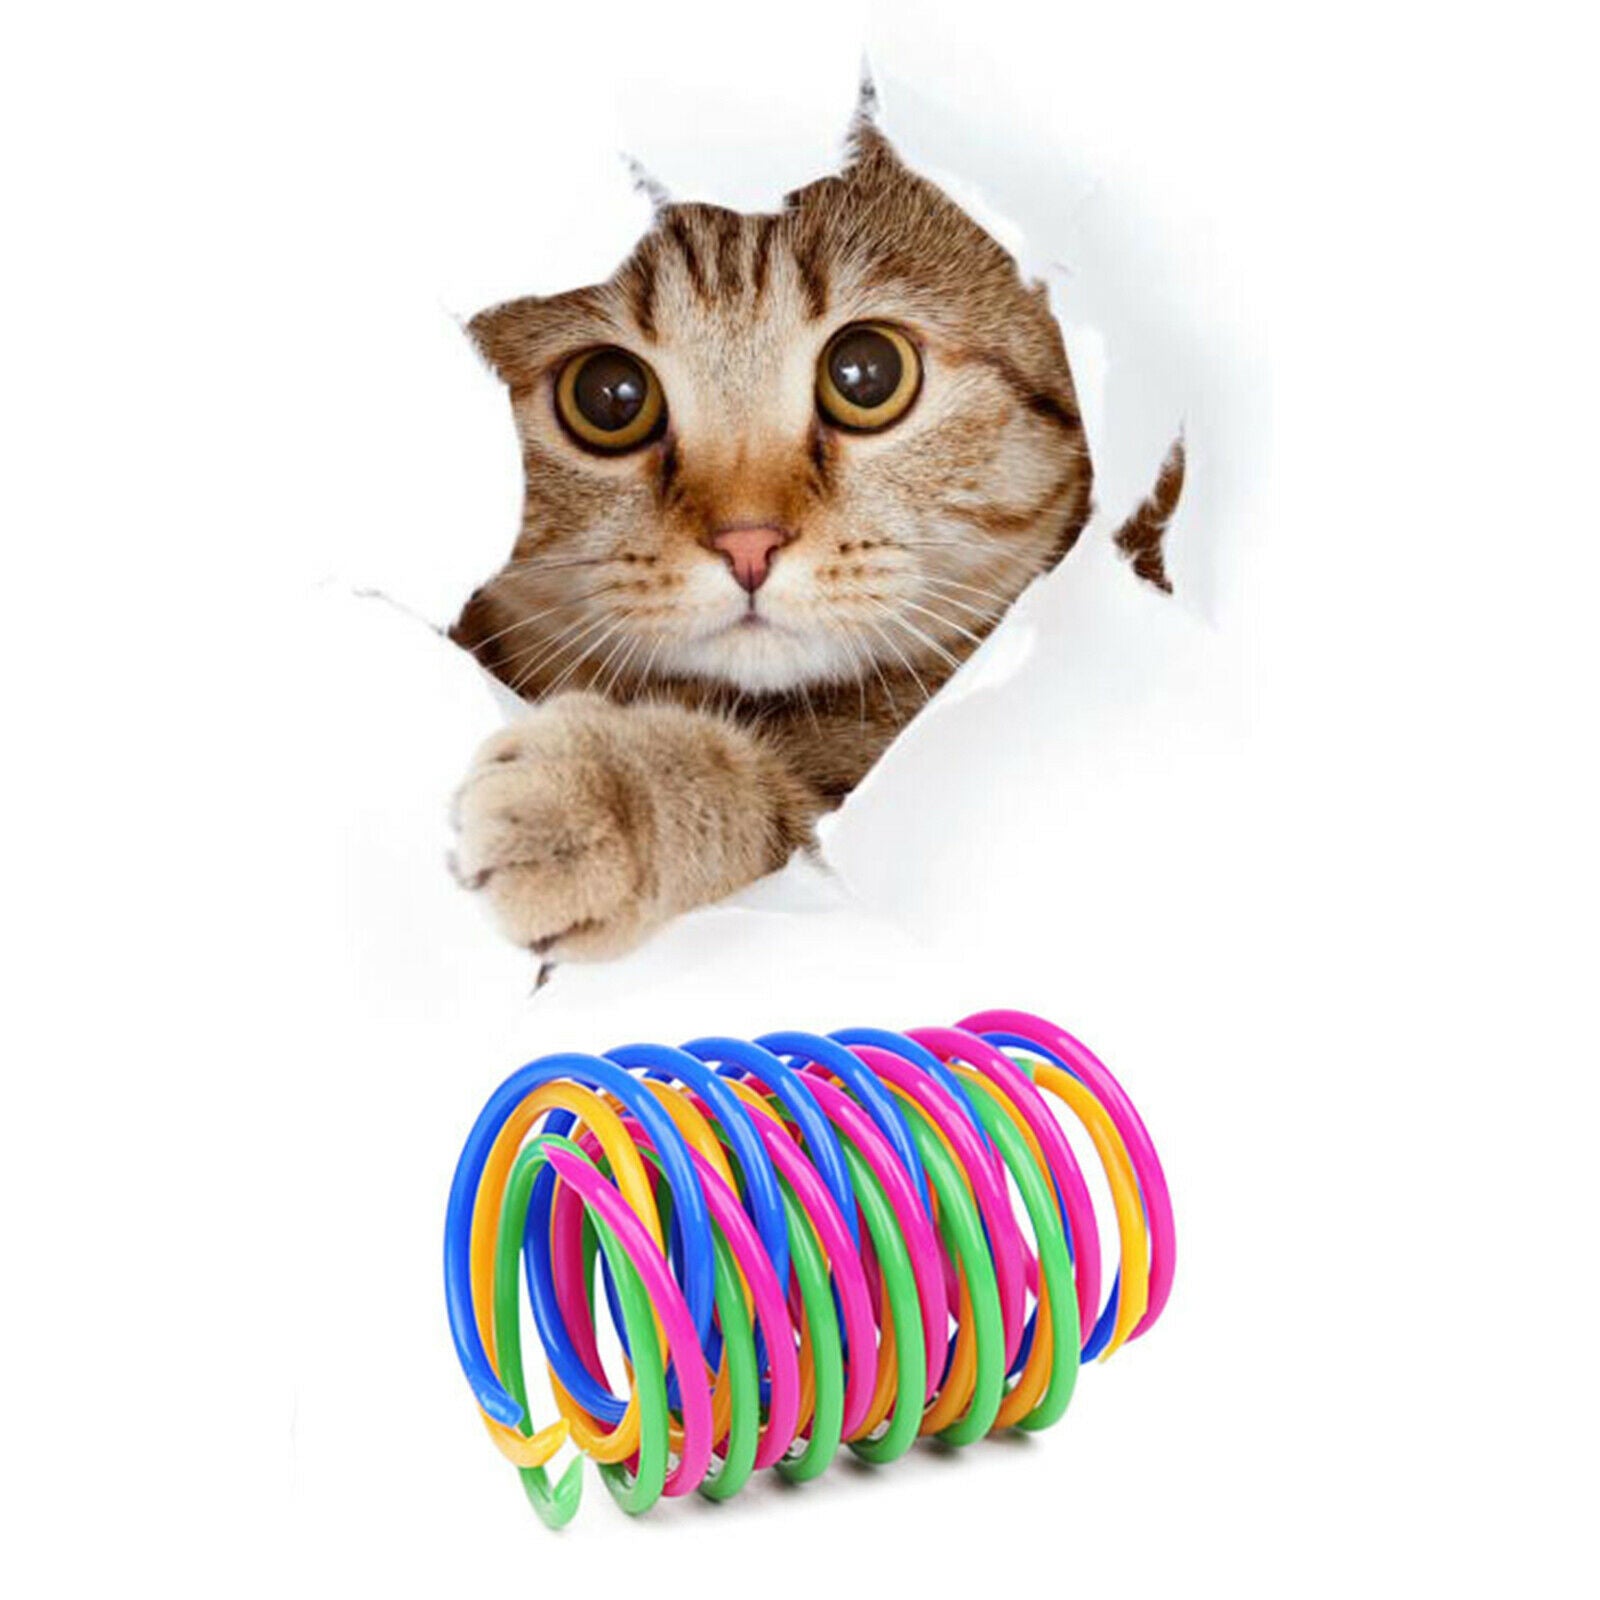 4x Pet Cat Spring Toys Coil Spiral Springs Training Pet Supplies Gifts